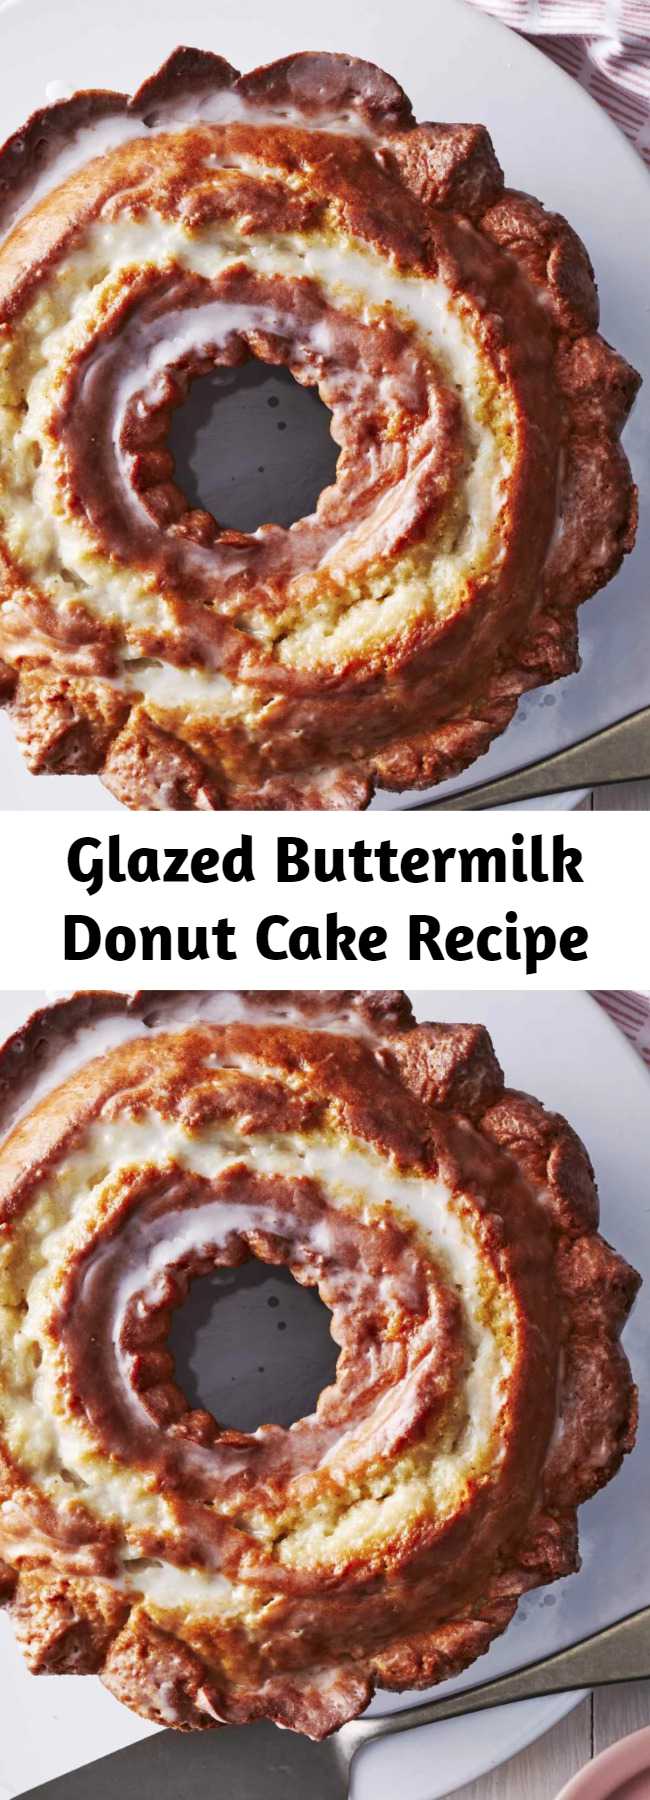 Glazed Buttermilk Donut Cake Recipe - This oversized “donut” is sure to be a hit. Although this dessert looks straight from the donut shop, the recipe itself is a moist and tender pound cake with added leavening, which gives the cake the cracked and craggy appearance of an old-fashioned donut. This delicious dessert idea is perfect for a bored-baking marathon. #recipes #recipeideas #dessert #dessertrecipes